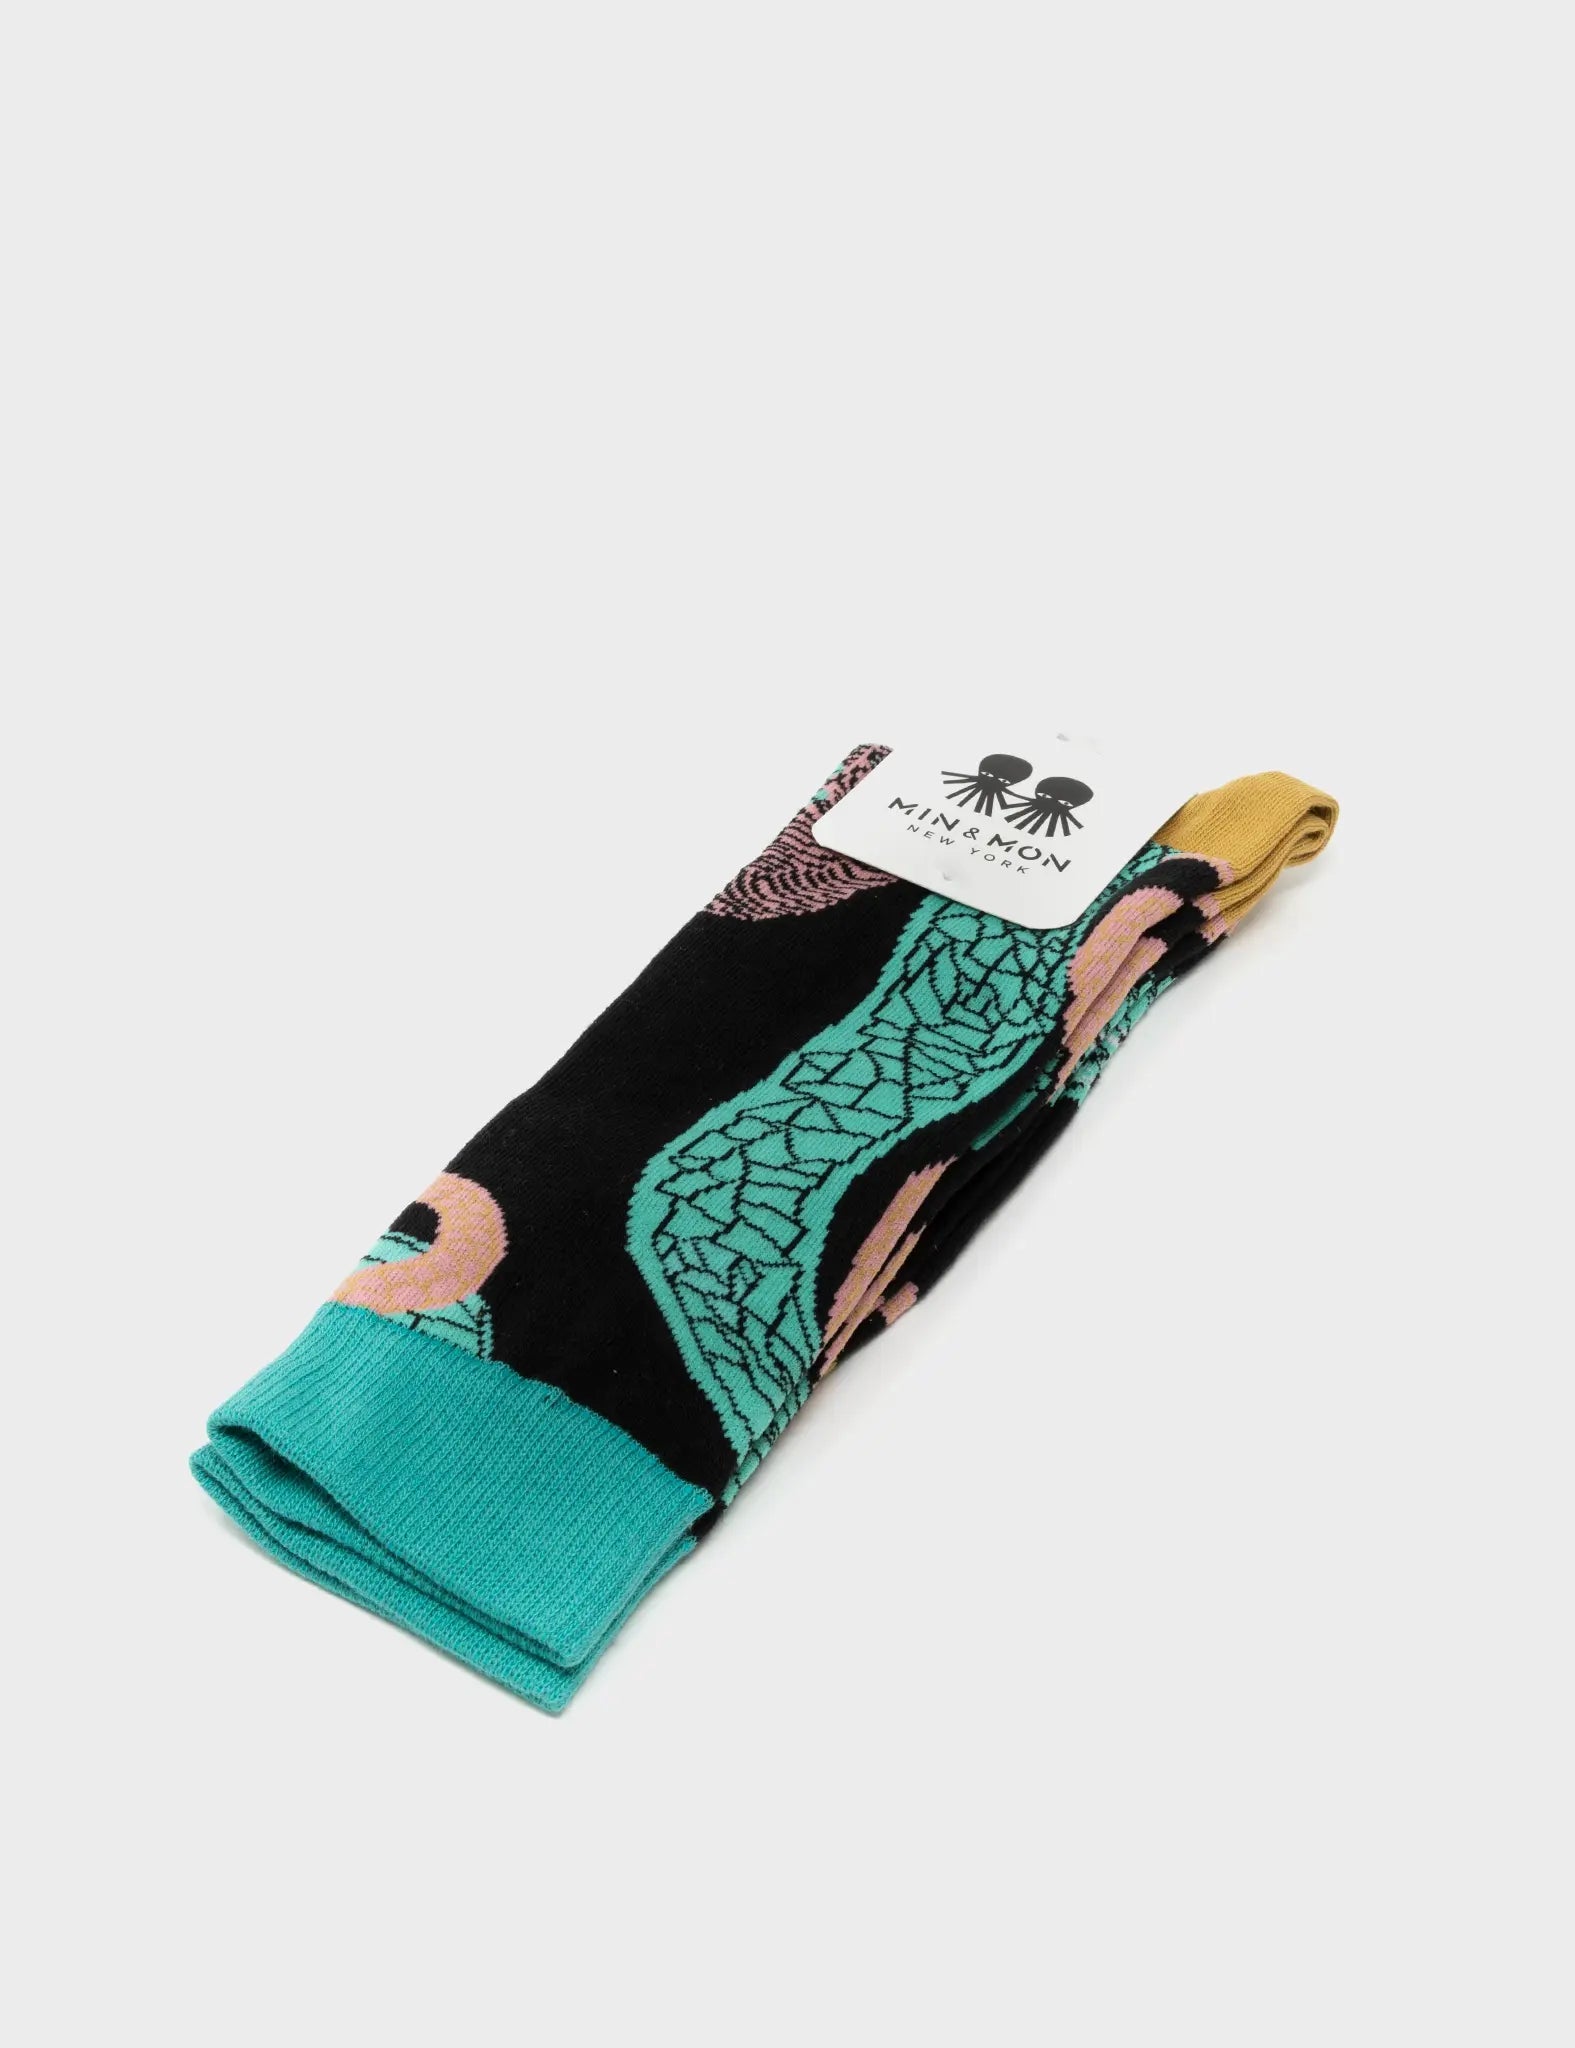 Socks - Tiger And Snake Black And Basil Green - Package 